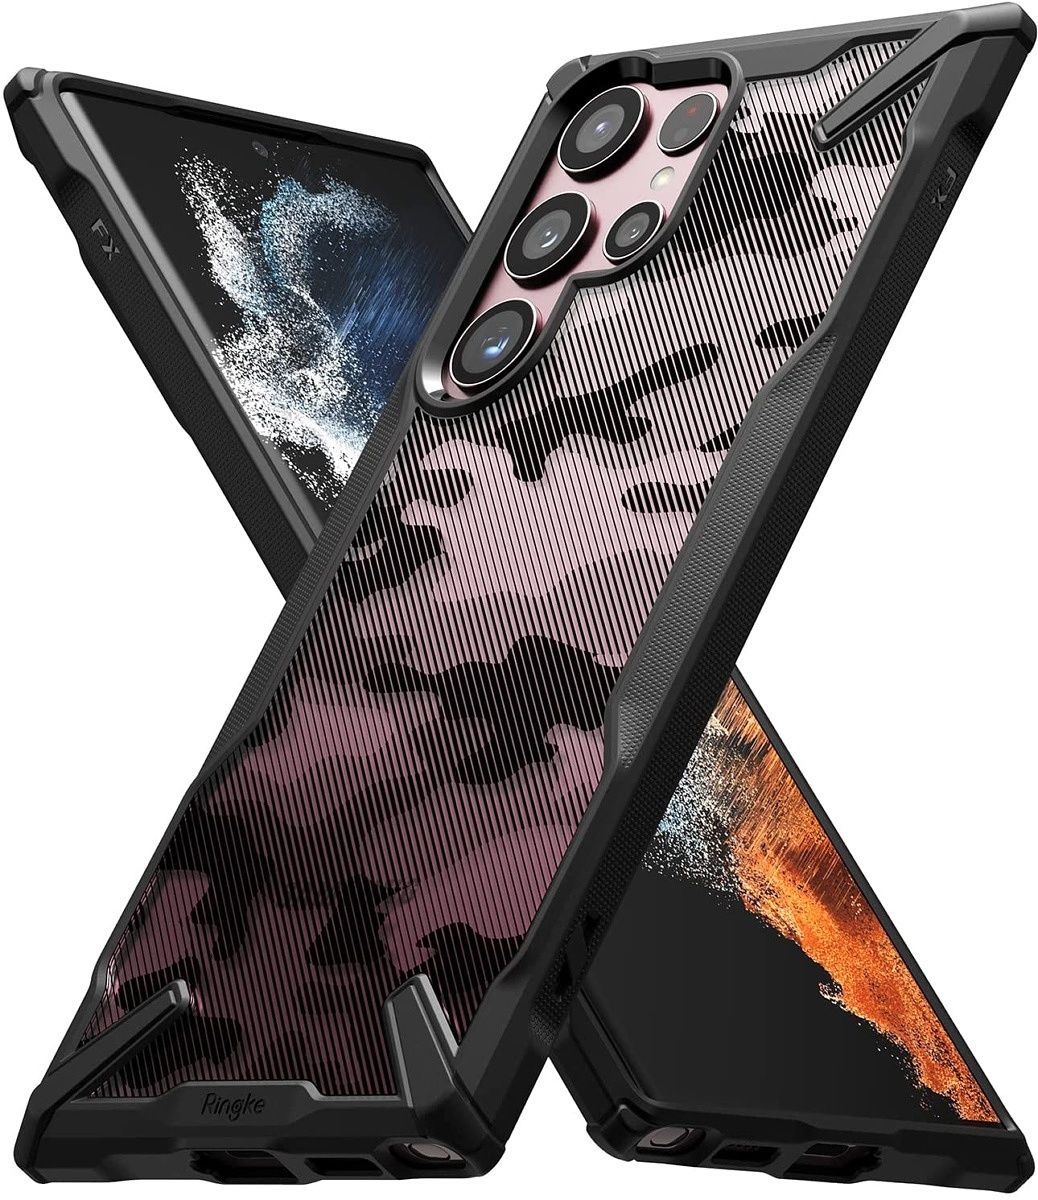 Ringke Fusion-X is a rugged case that features a stylish camouflage pattern on the back, which gives it a rugged and stylish look.